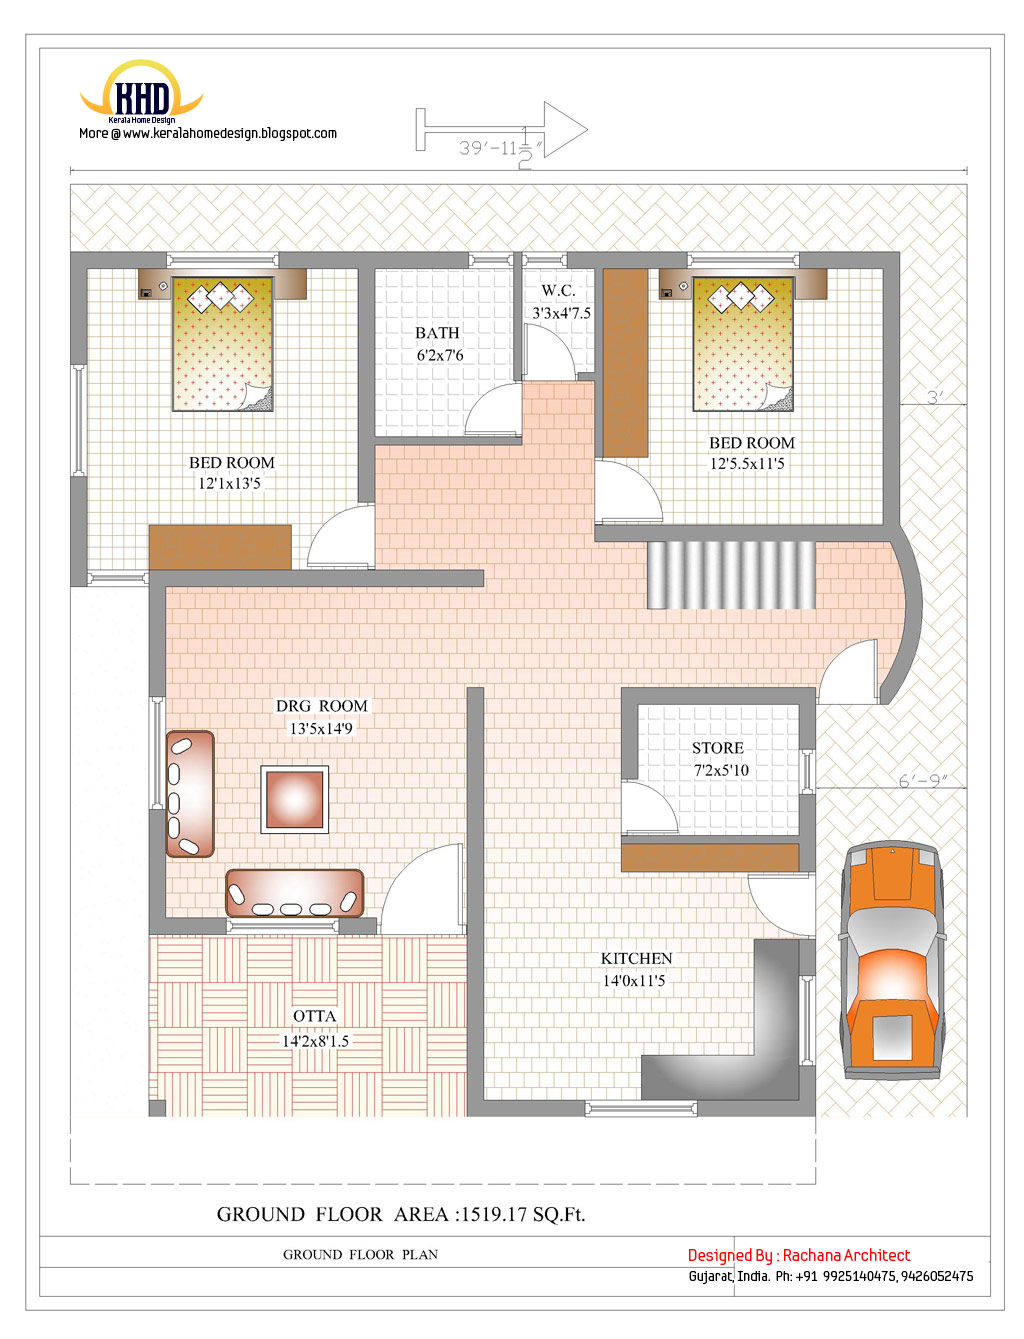  Duplex  House  Plan  and Elevation 2878 Sq  Ft  Indian  